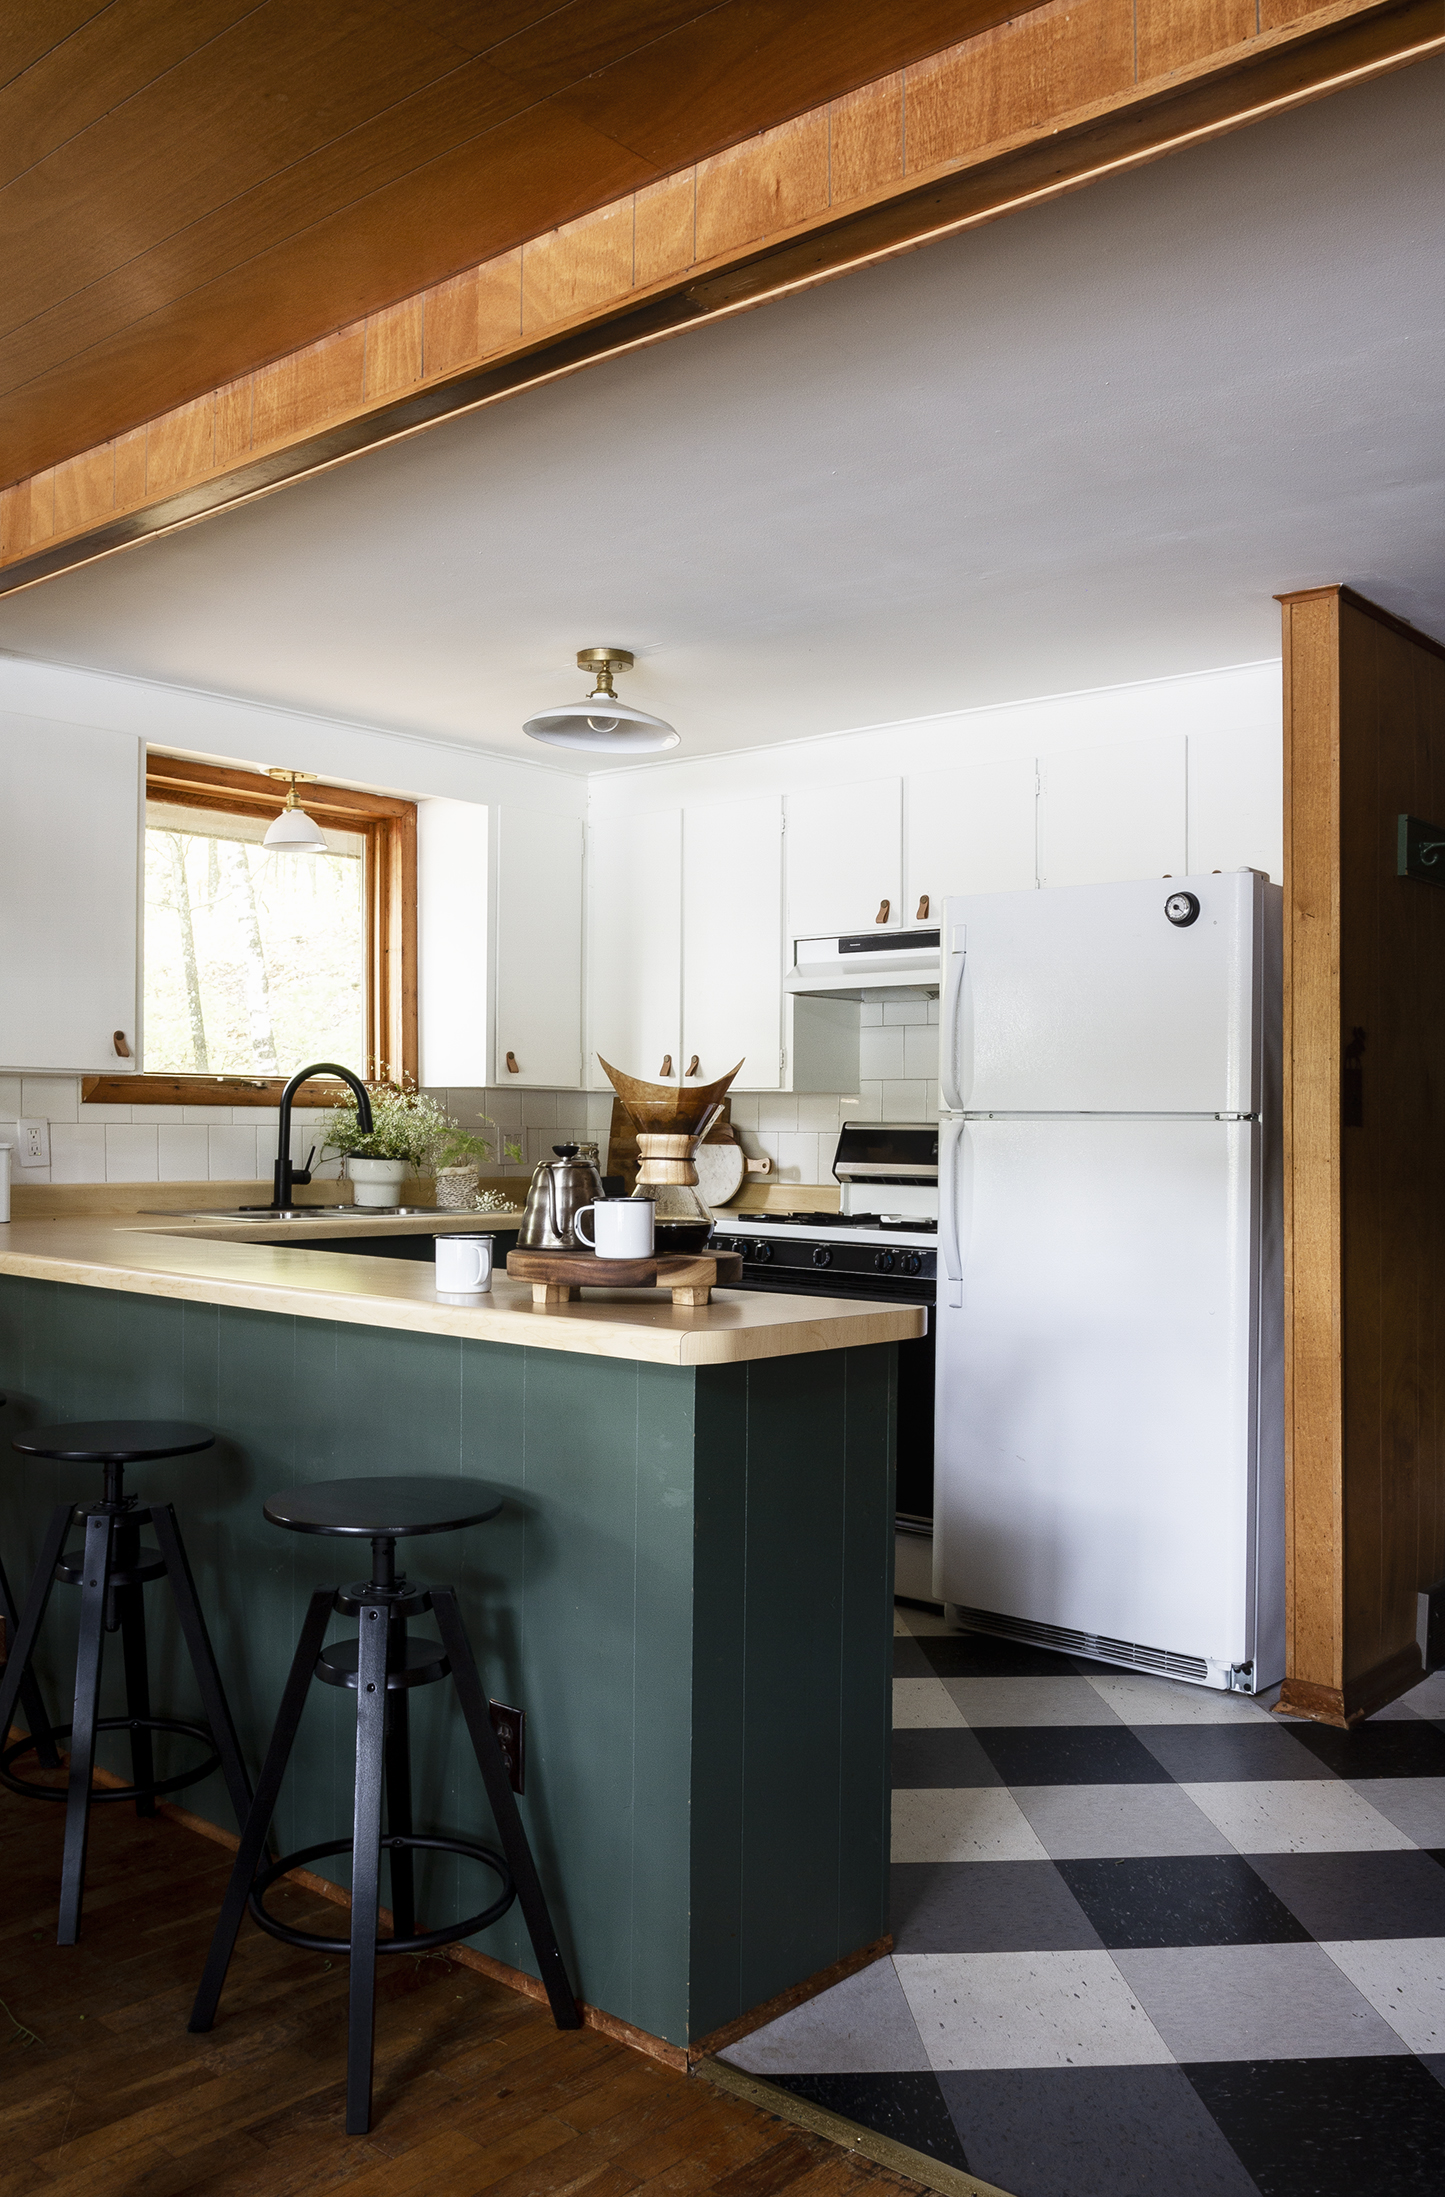 The Final Reveal of our Historic Kitchen Renovation - Deuce Cities Henhouse